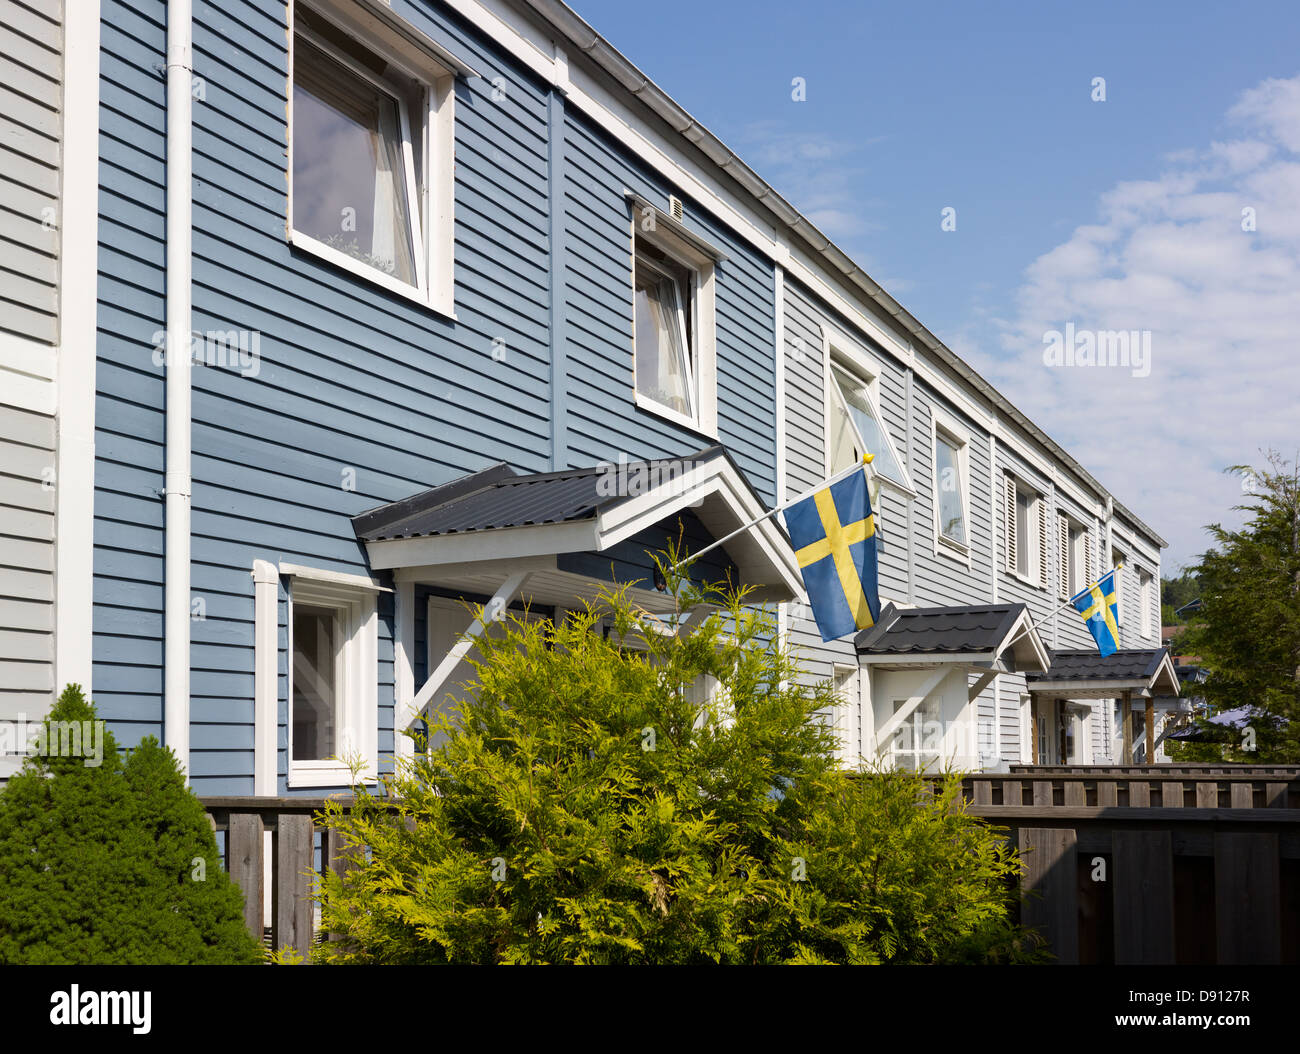 View of terrace house Stock Photo